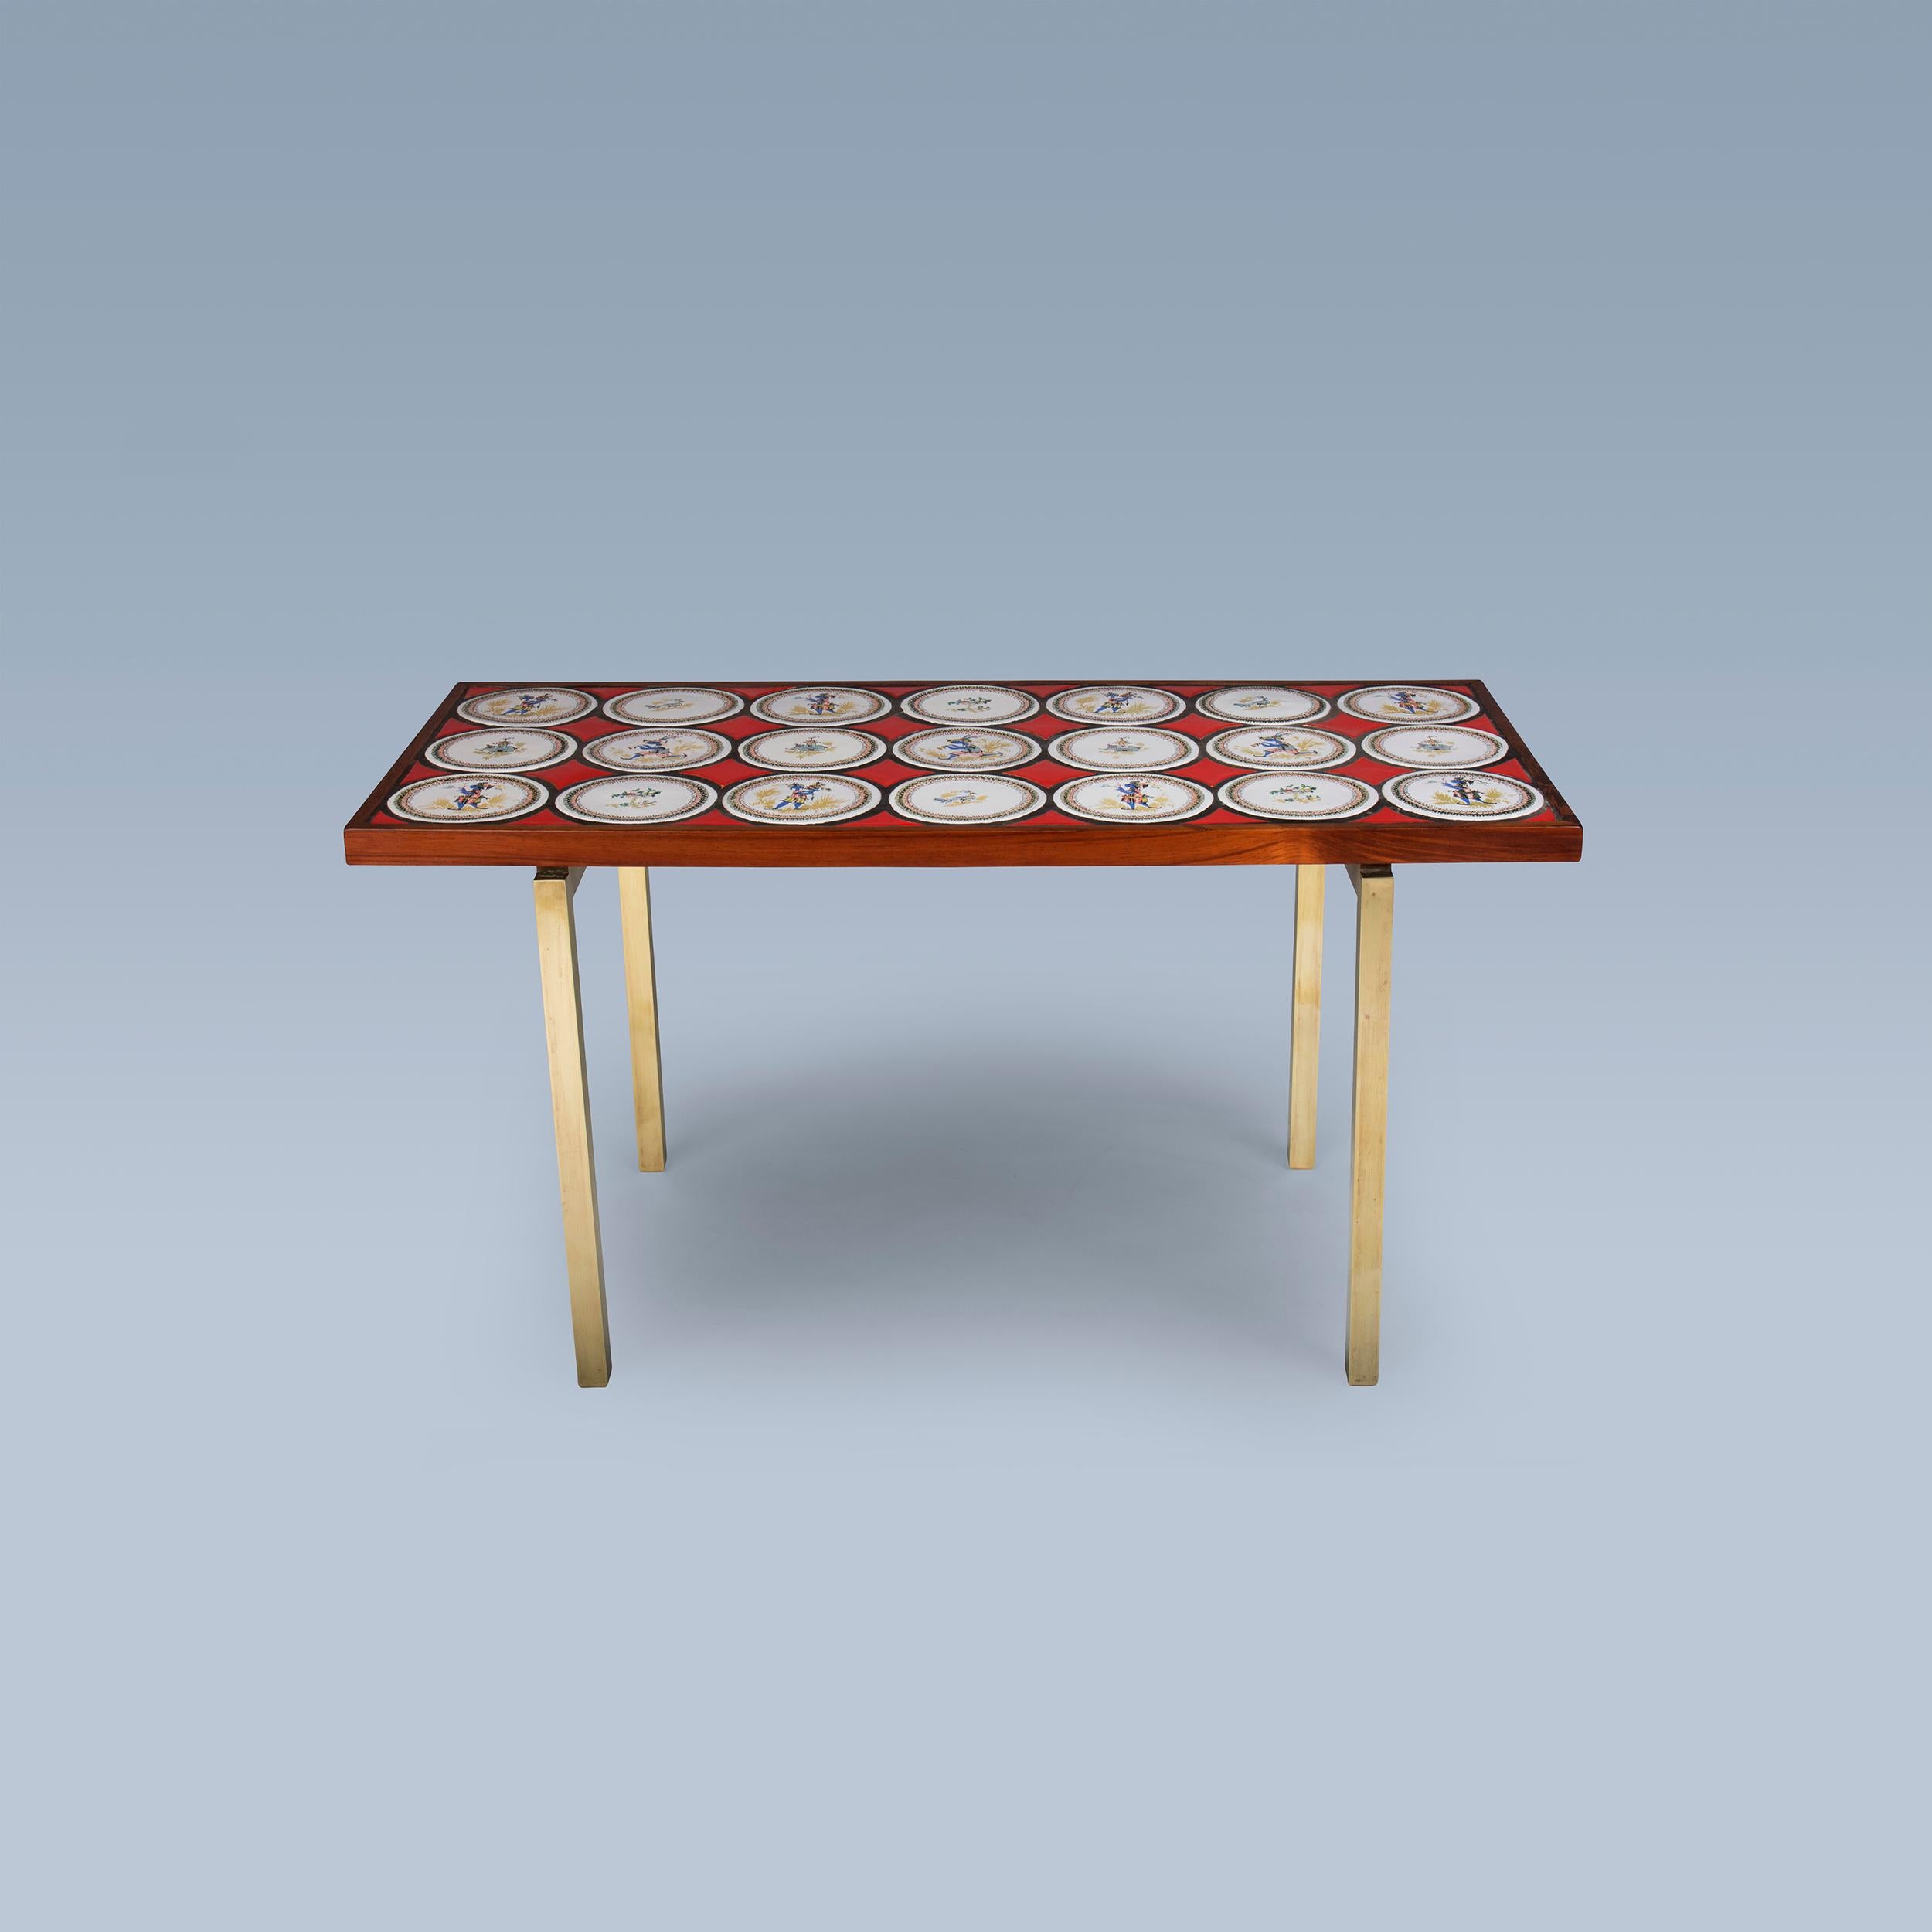 This rare coffee table designed by Danish multi-artist Bjørn Wiinblad (1918-2006) has 21 decorative hand-painted tiles on top. Legs are made in bronze.
The table was made in the early 1960s for Danish luxury department store Illum Bolighus in